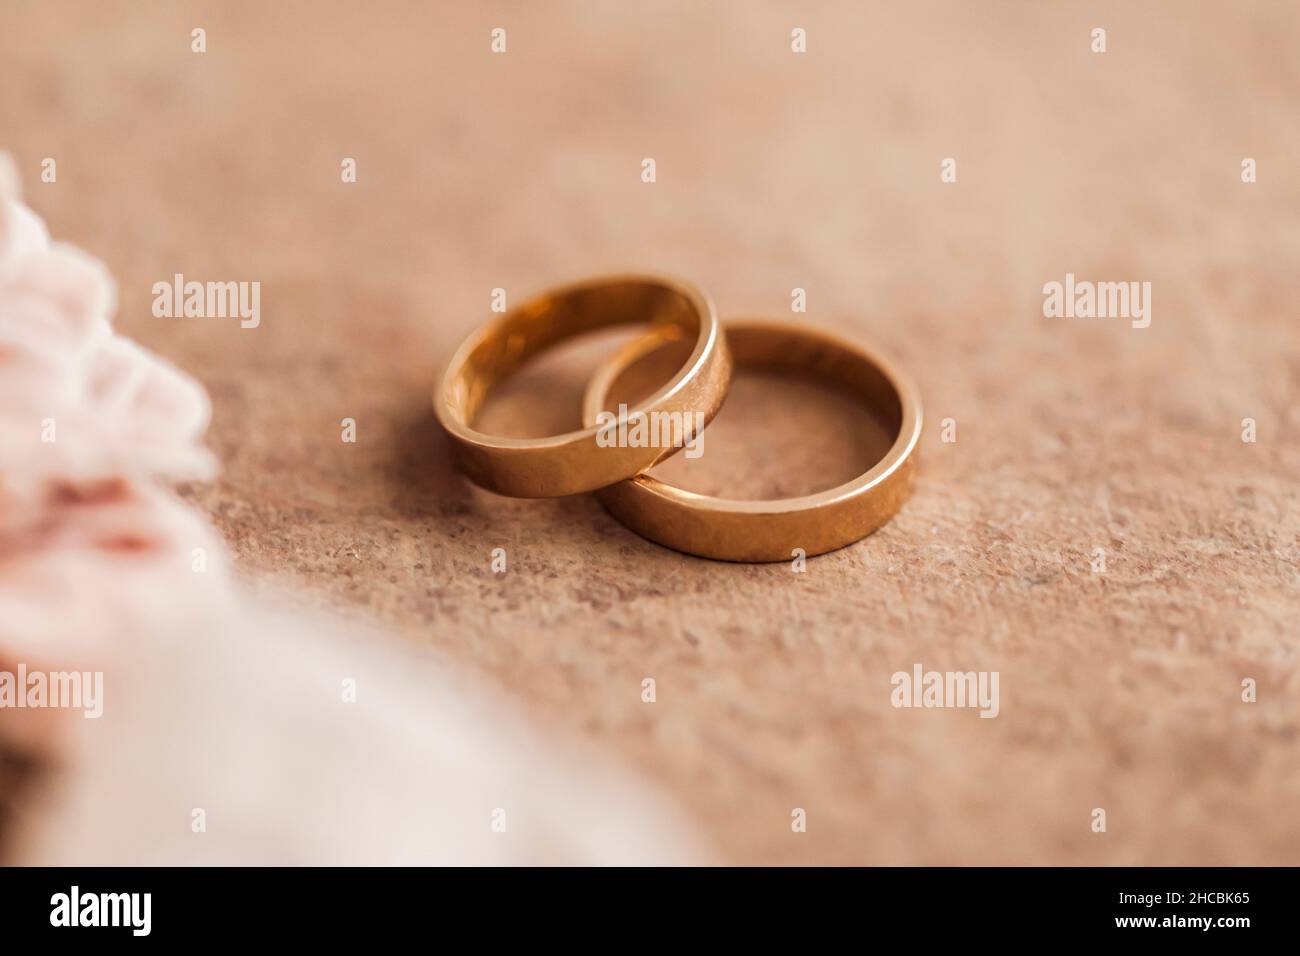 Studio shot of tray with engagement ring and golden wedding rings Stock Photo